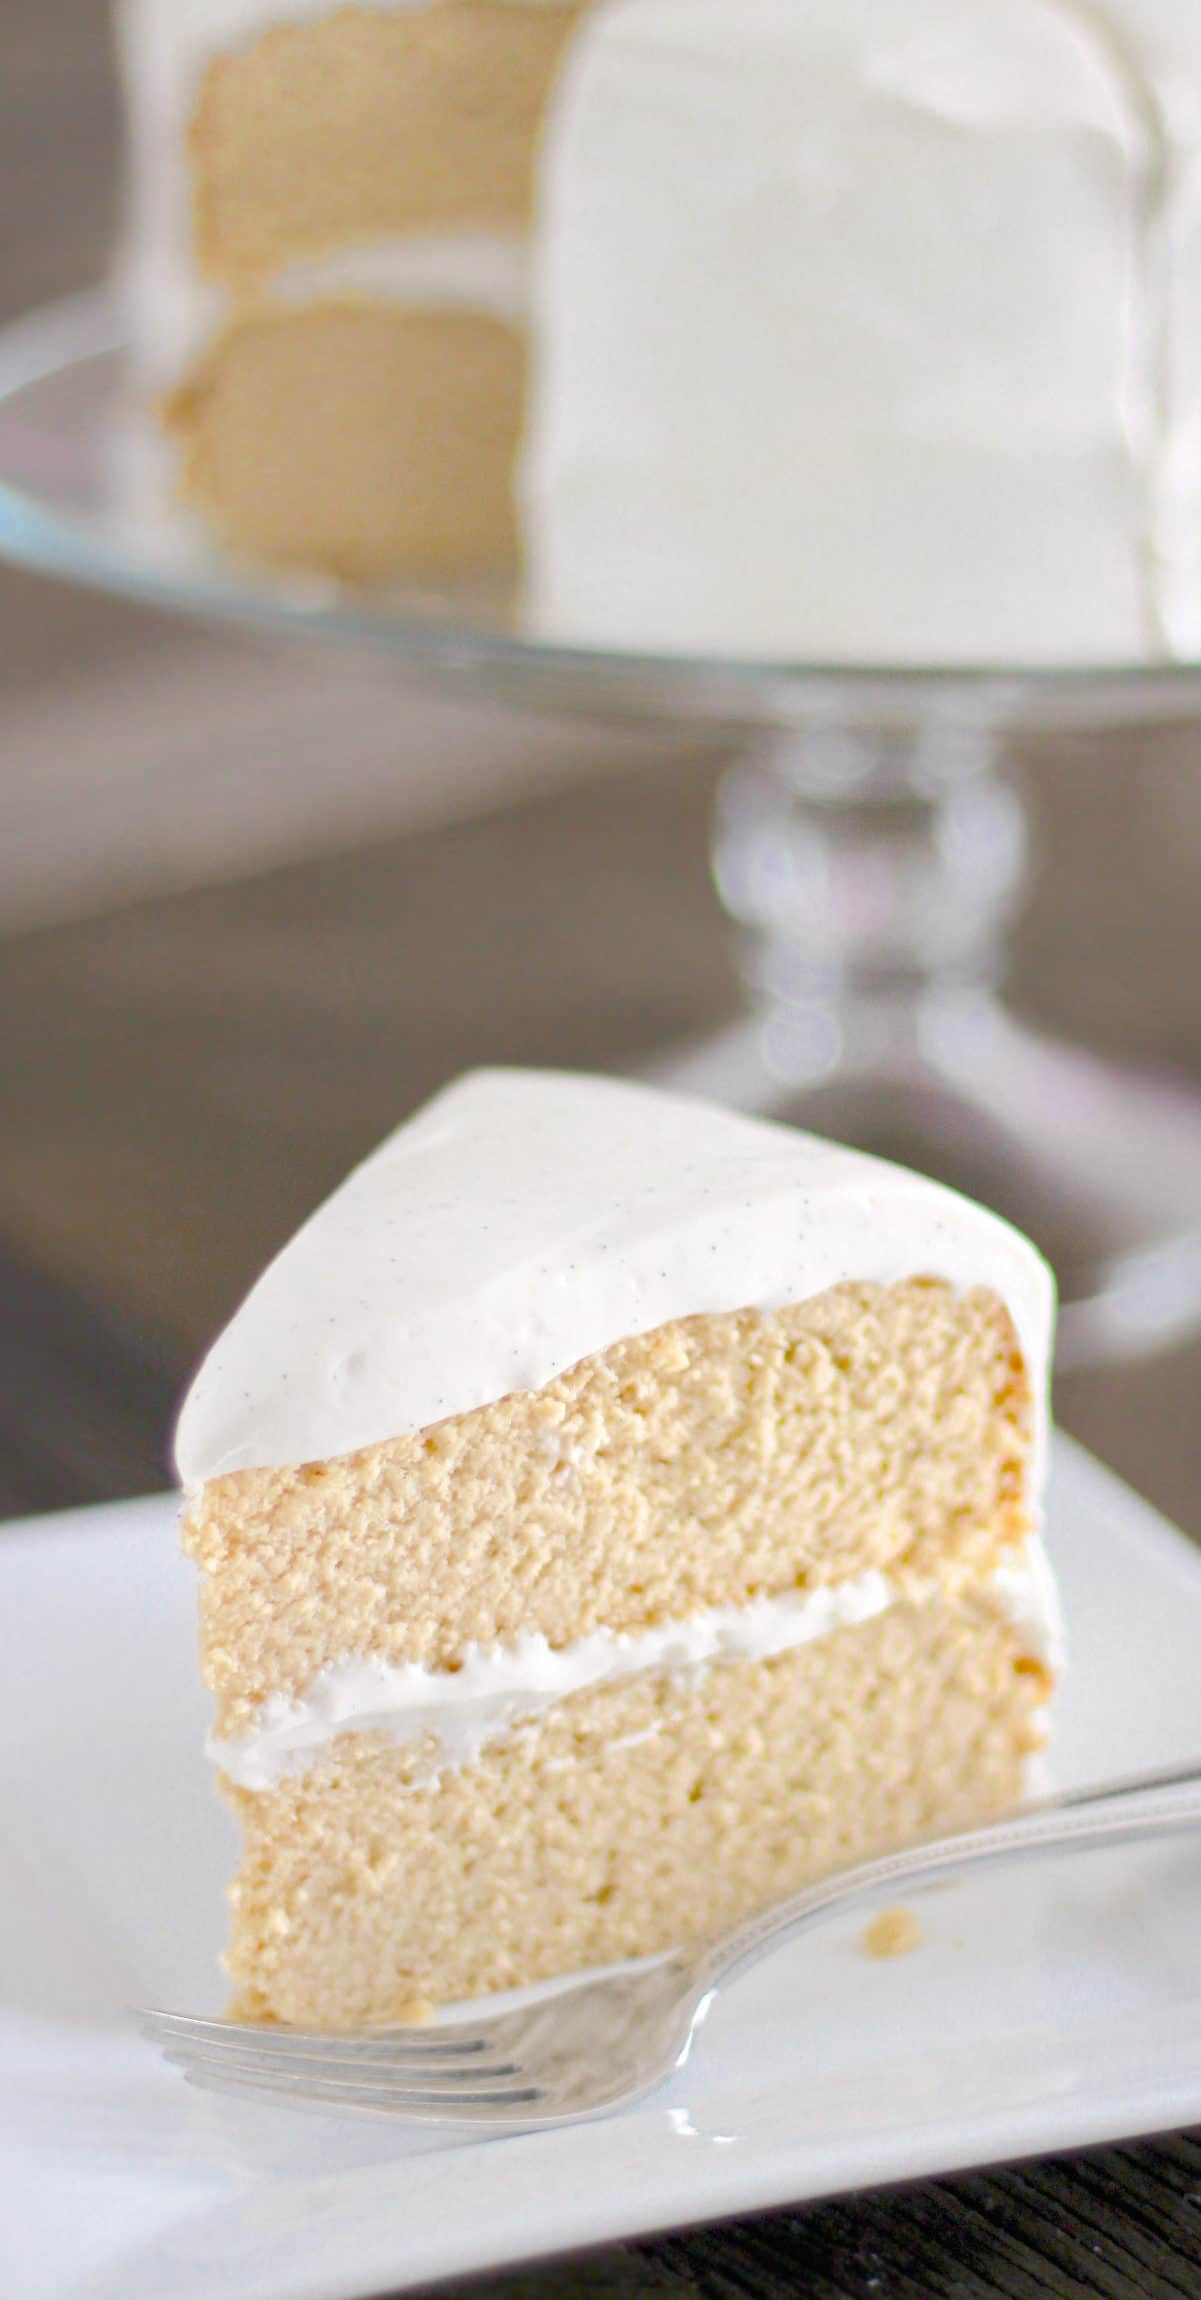 Healthy Low Carb and Gluten Free Vanilla Cake with Vanilla Bean Cream Cheese Frosting - Healthy Dessert Recipes at Desserts with Benefits